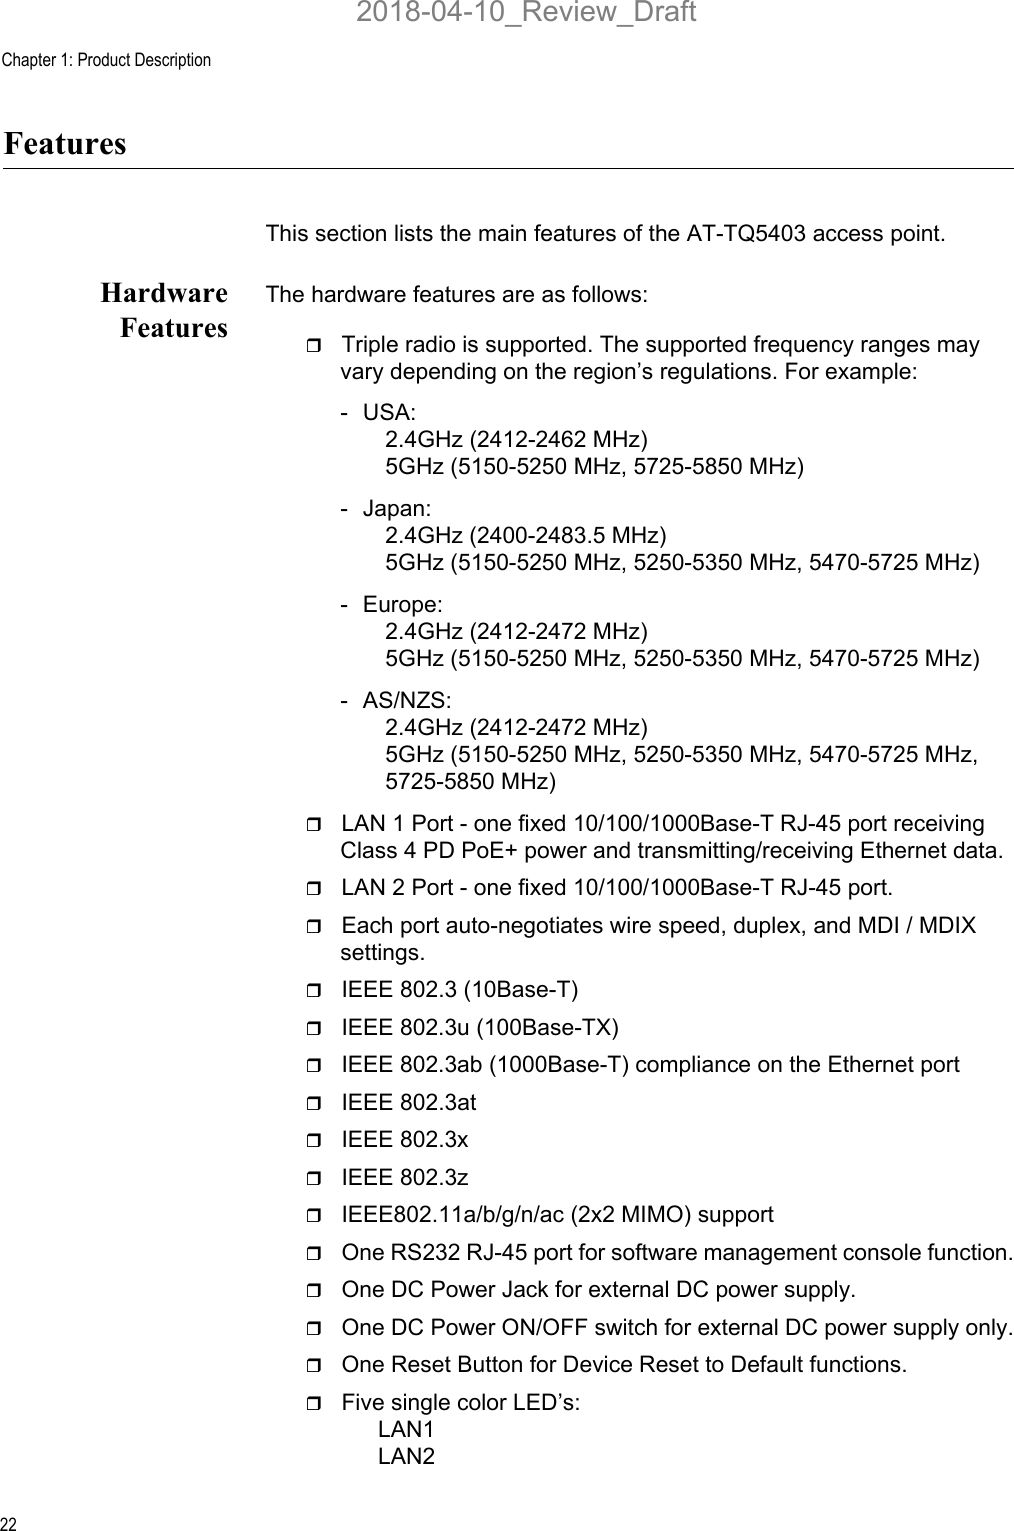 Chapter 1: Product Description22FeaturesThis section lists the main features of the AT-TQ5403 access point.HardwareFeaturesThe hardware features are as follows:Triple radio is supported. The supported frequency ranges may vary depending on the region’s regulations. For example:- USA:2.4GHz (2412-2462 MHz)5GHz (5150-5250 MHz, 5725-5850 MHz)- Japan:2.4GHz (2400-2483.5 MHz)5GHz (5150-5250 MHz, 5250-5350 MHz, 5470-5725 MHz)- Europe:2.4GHz (2412-2472 MHz)5GHz (5150-5250 MHz, 5250-5350 MHz, 5470-5725 MHz)- AS/NZS:2.4GHz (2412-2472 MHz)5GHz (5150-5250 MHz, 5250-5350 MHz, 5470-5725 MHz, 5725-5850 MHz)LAN 1 Port - one fixed 10/100/1000Base-T RJ-45 port receiving Class 4 PD PoE+ power and transmitting/receiving Ethernet data.LAN 2 Port - one fixed 10/100/1000Base-T RJ-45 port. Each port auto-negotiates wire speed, duplex, and MDI / MDIX settings.IEEE 802.3 (10Base-T)IEEE 802.3u (100Base-TX)IEEE 802.3ab (1000Base-T) compliance on the Ethernet portIEEE 802.3at IEEE 802.3xIEEE 802.3zIEEE802.11a/b/g/n/ac (2x2 MIMO) supportOne RS232 RJ-45 port for software management console function.One DC Power Jack for external DC power supply.One DC Power ON/OFF switch for external DC power supply only.One Reset Button for Device Reset to Default functions.Five single color LED’s:LAN1LAN22018-04-10_Review_Draft